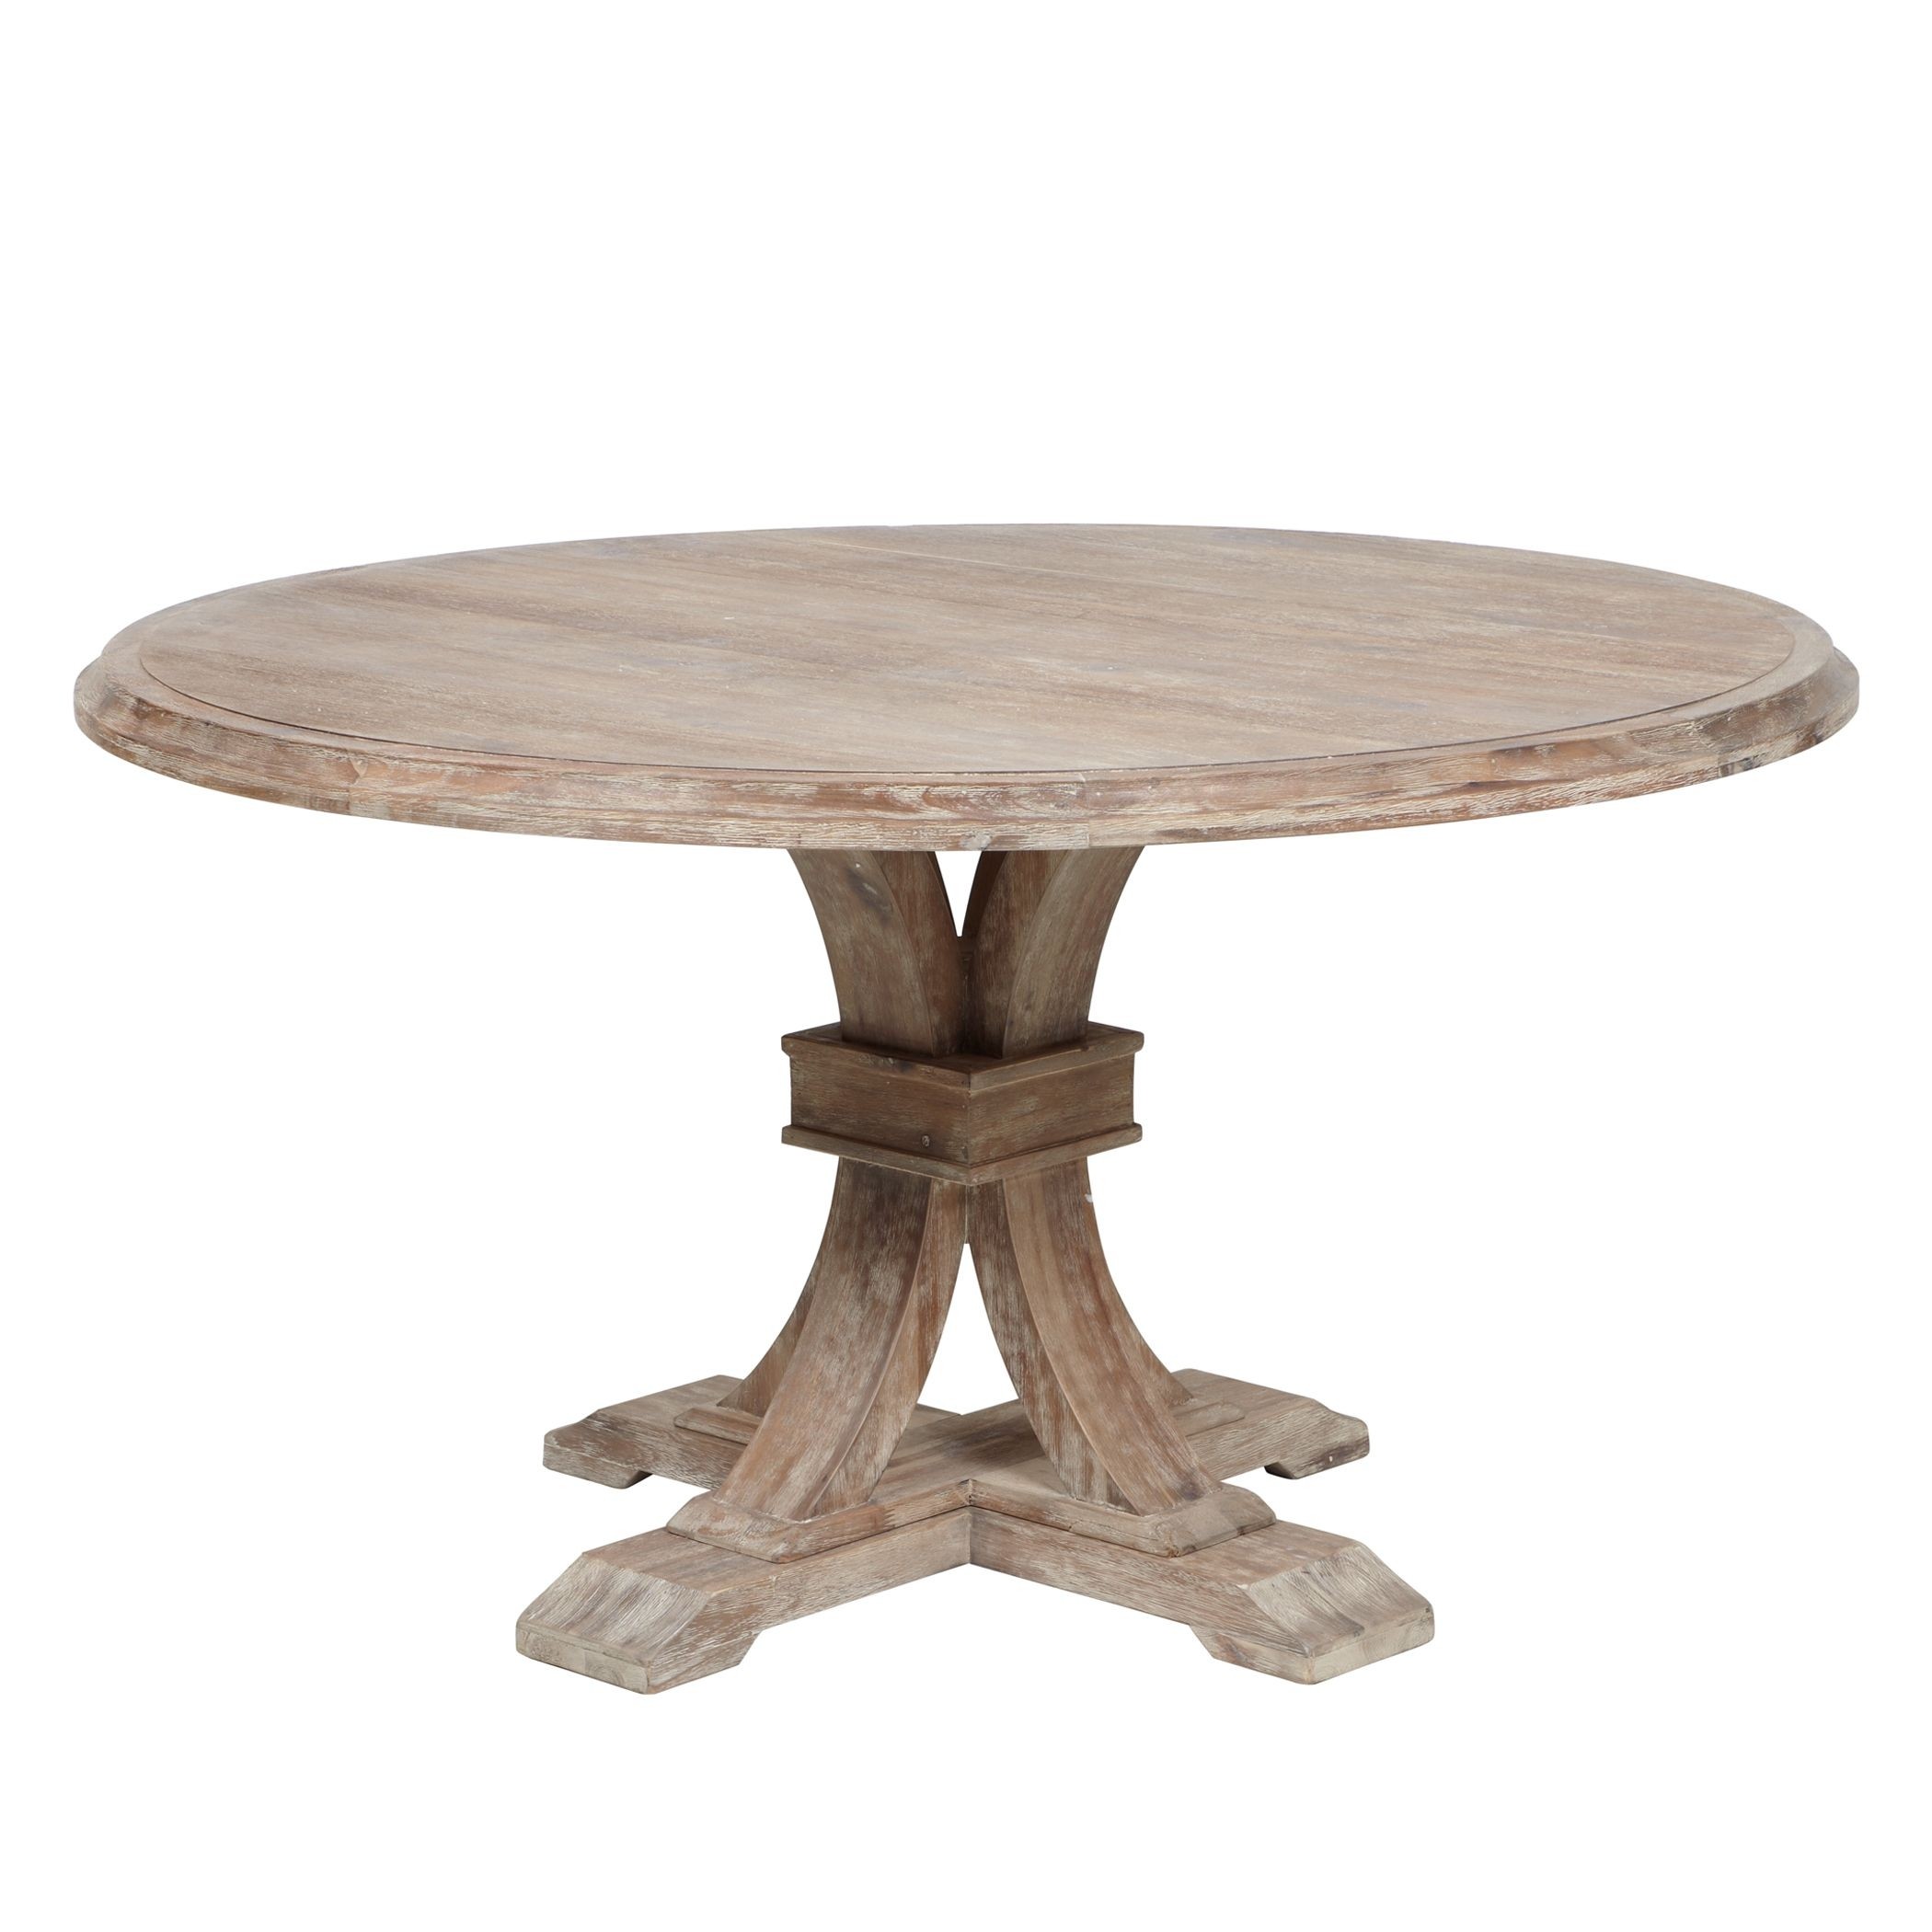 Round dining tables for 10